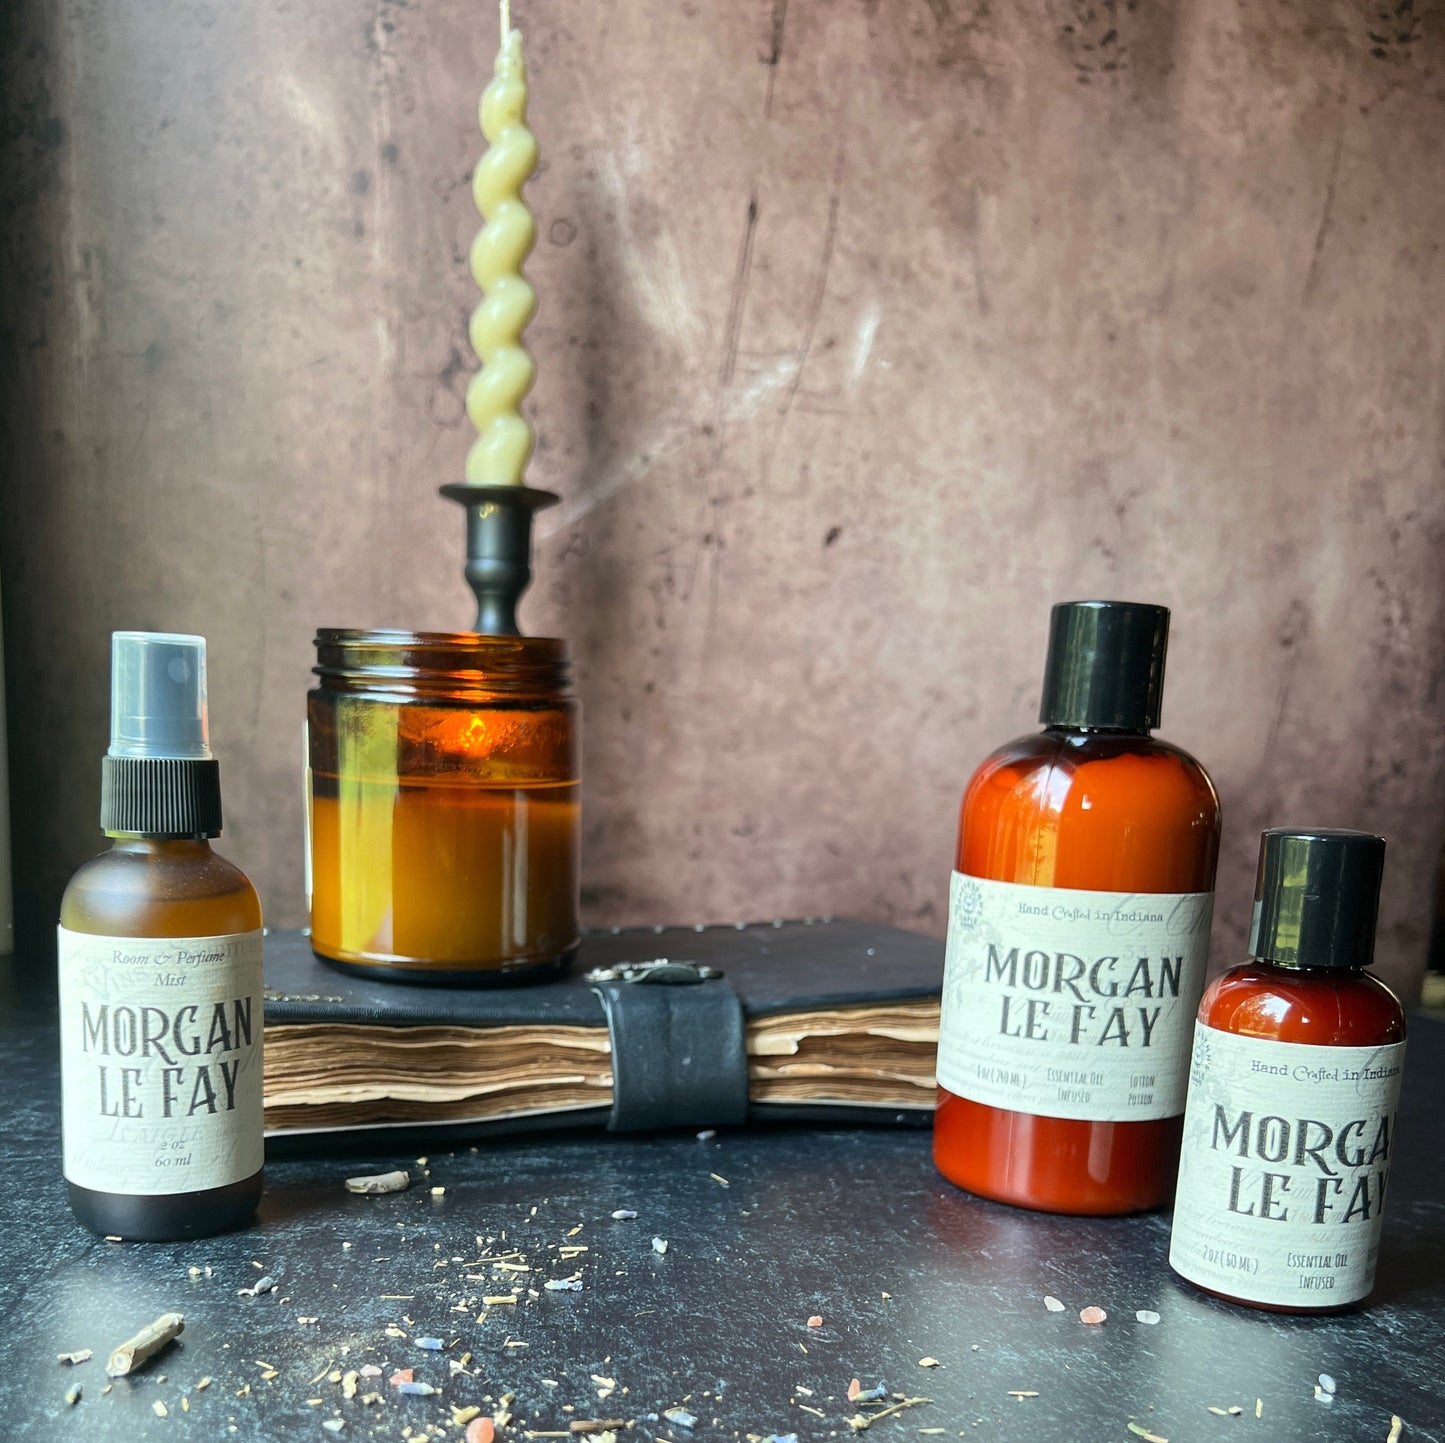 Morgan le Fay, Fragrance, Lotion, Spray, Skin Care, fragrance, witchy, shea butter, Argan oil, perfume, intention set, cologne, aromatherapy